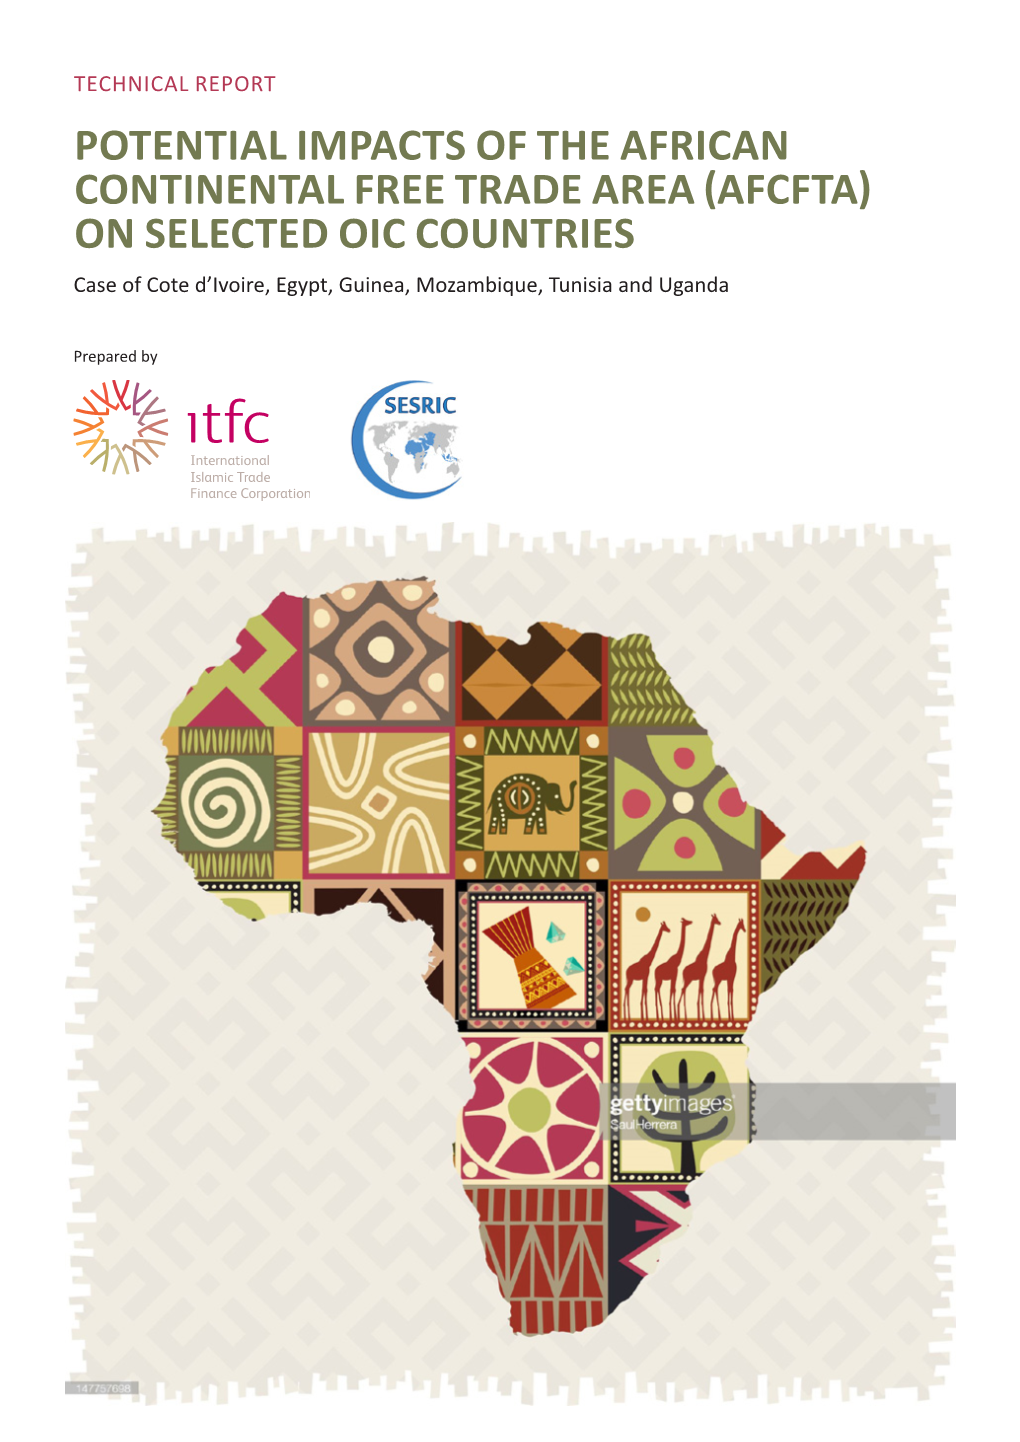 POTENTIAL IMPACTS of the AFRICAN CONTINENTAL FREE TRADE AREA (AFCFTA) on SELECTED OIC COUNTRIES Case of Cote D’Ivoire, Egypt, Guinea, Mozambique, Tunisia and Uganda